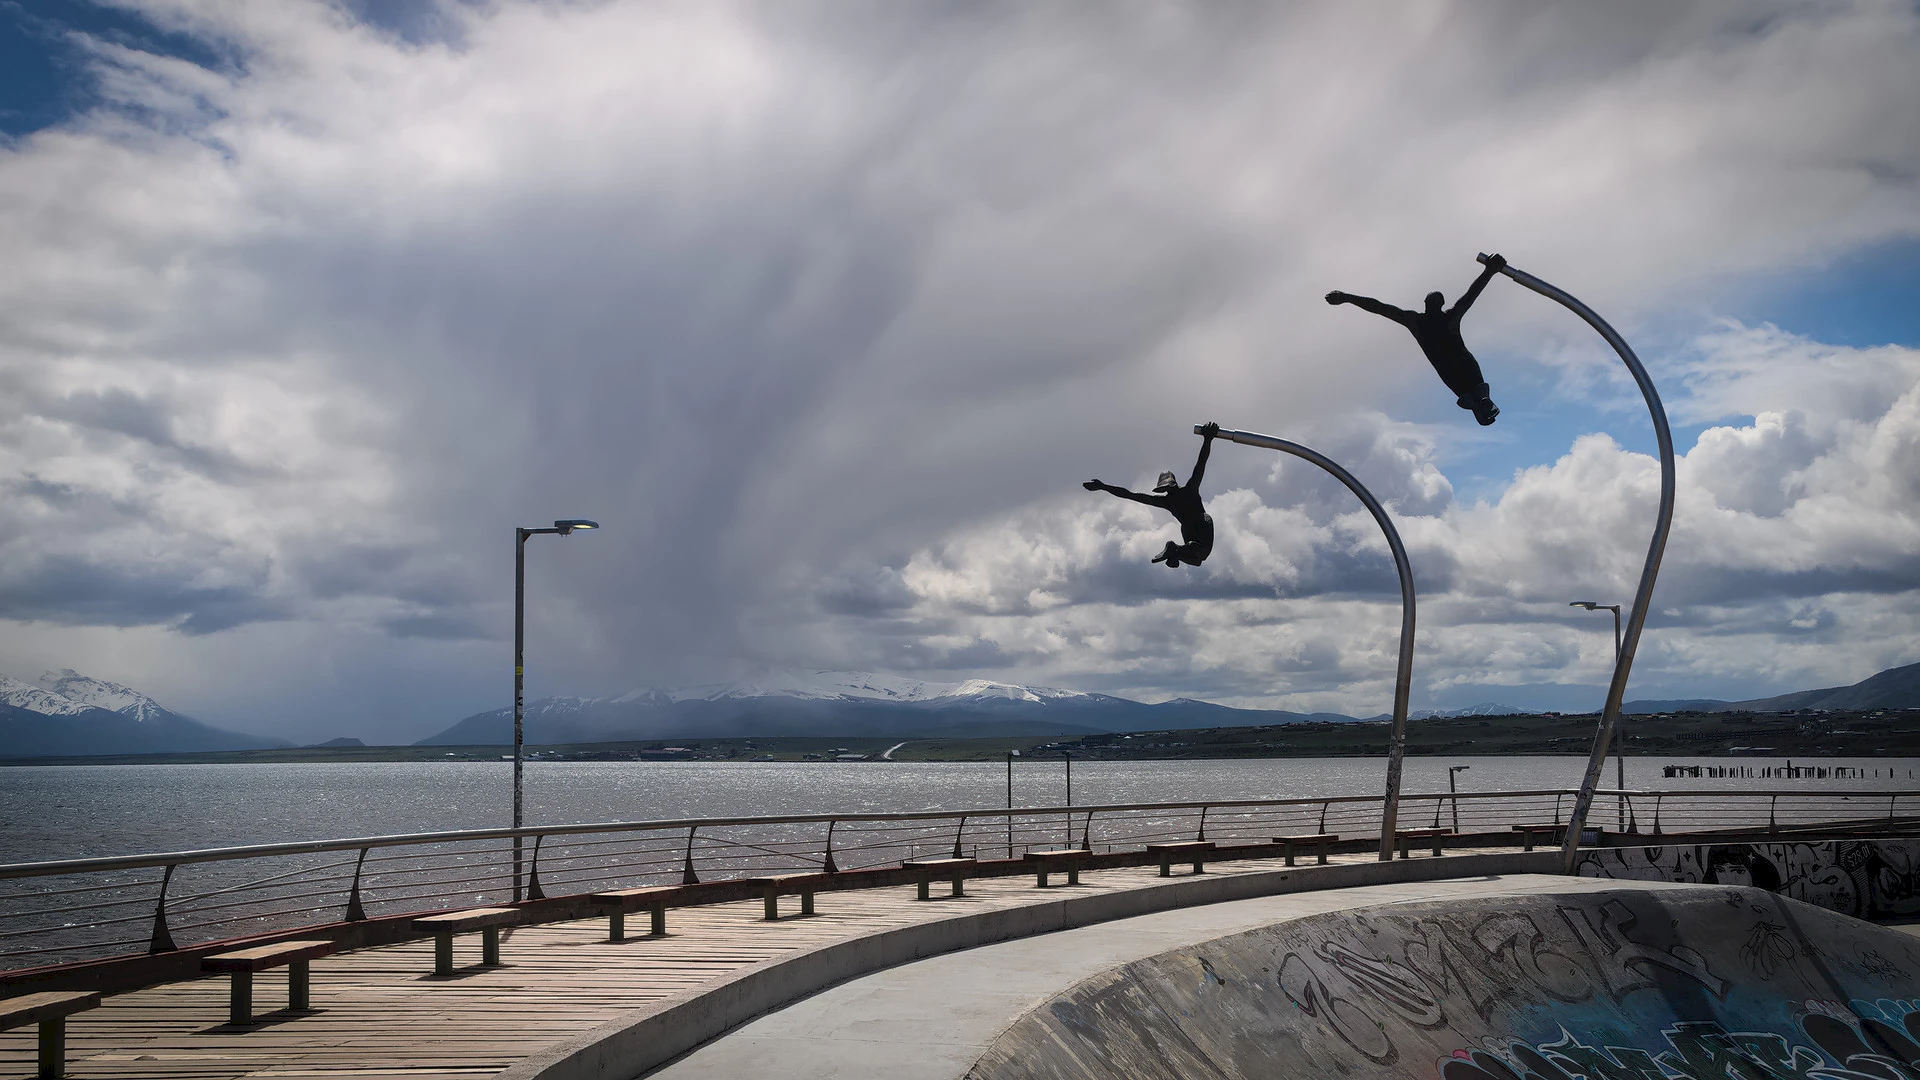 Monument to the wind statue on the shore in Puerto Natales